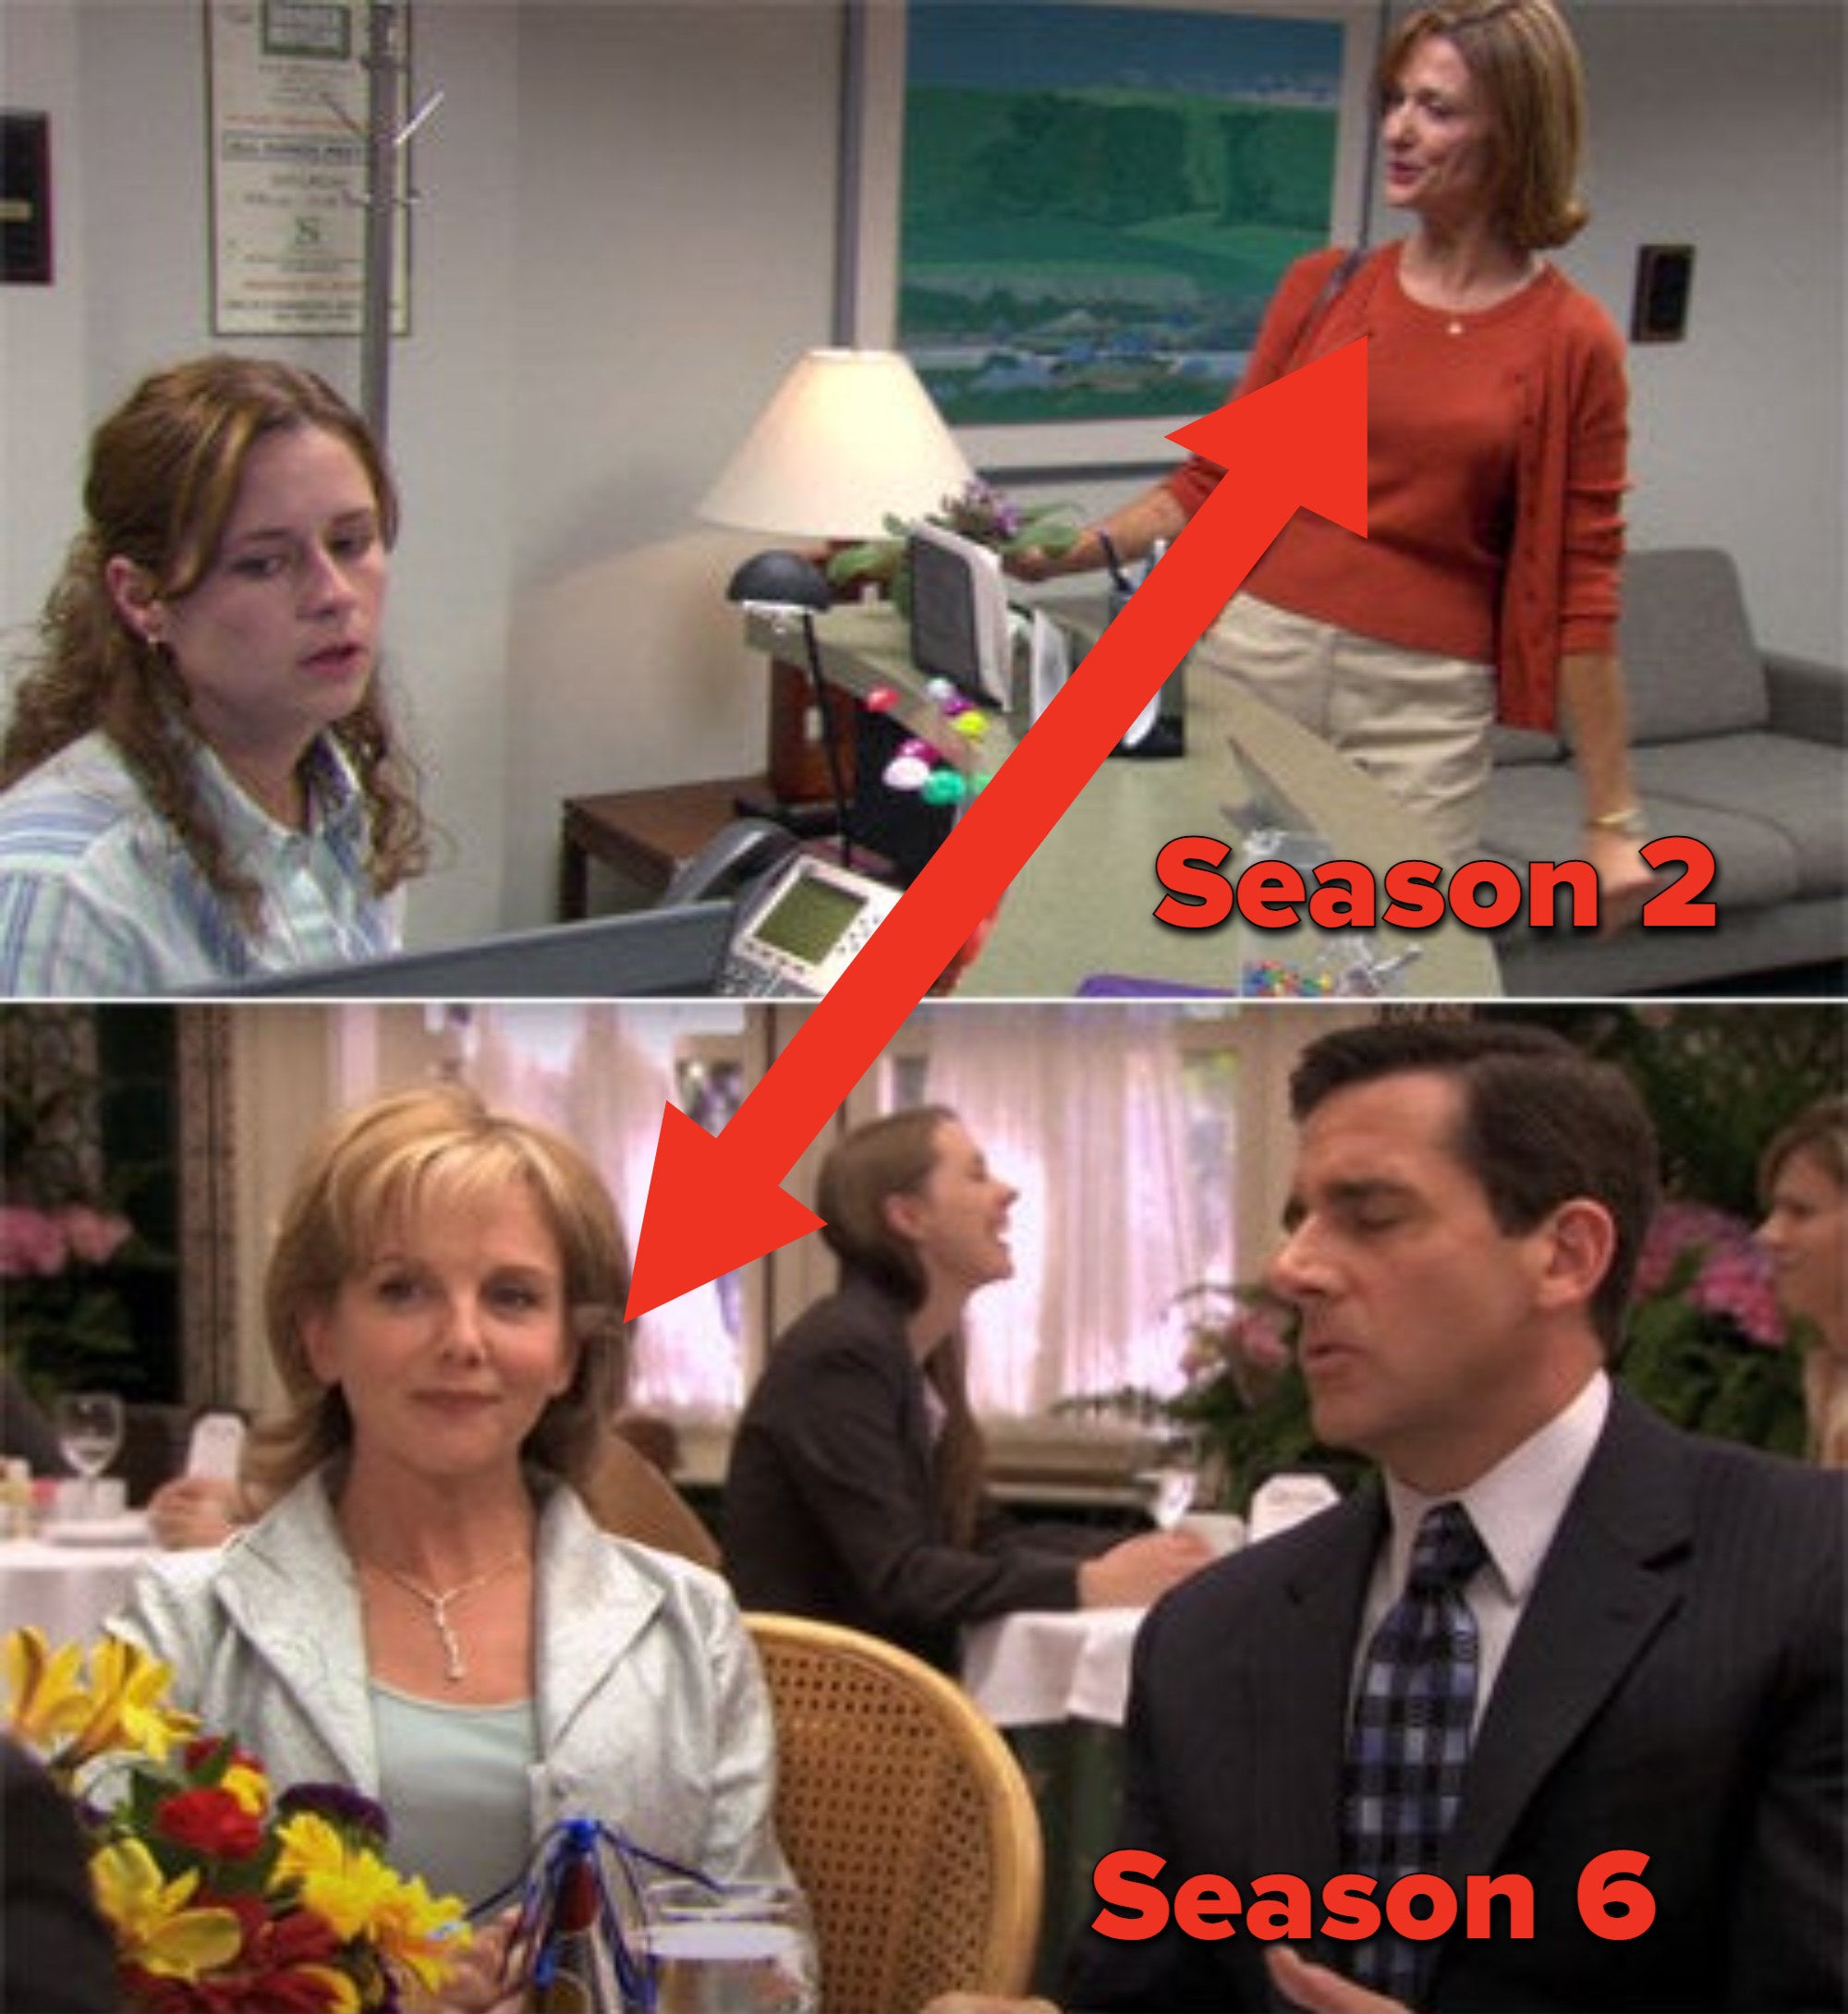 Pam&#x27;s mom in seasons 2 and 6 played by different actors